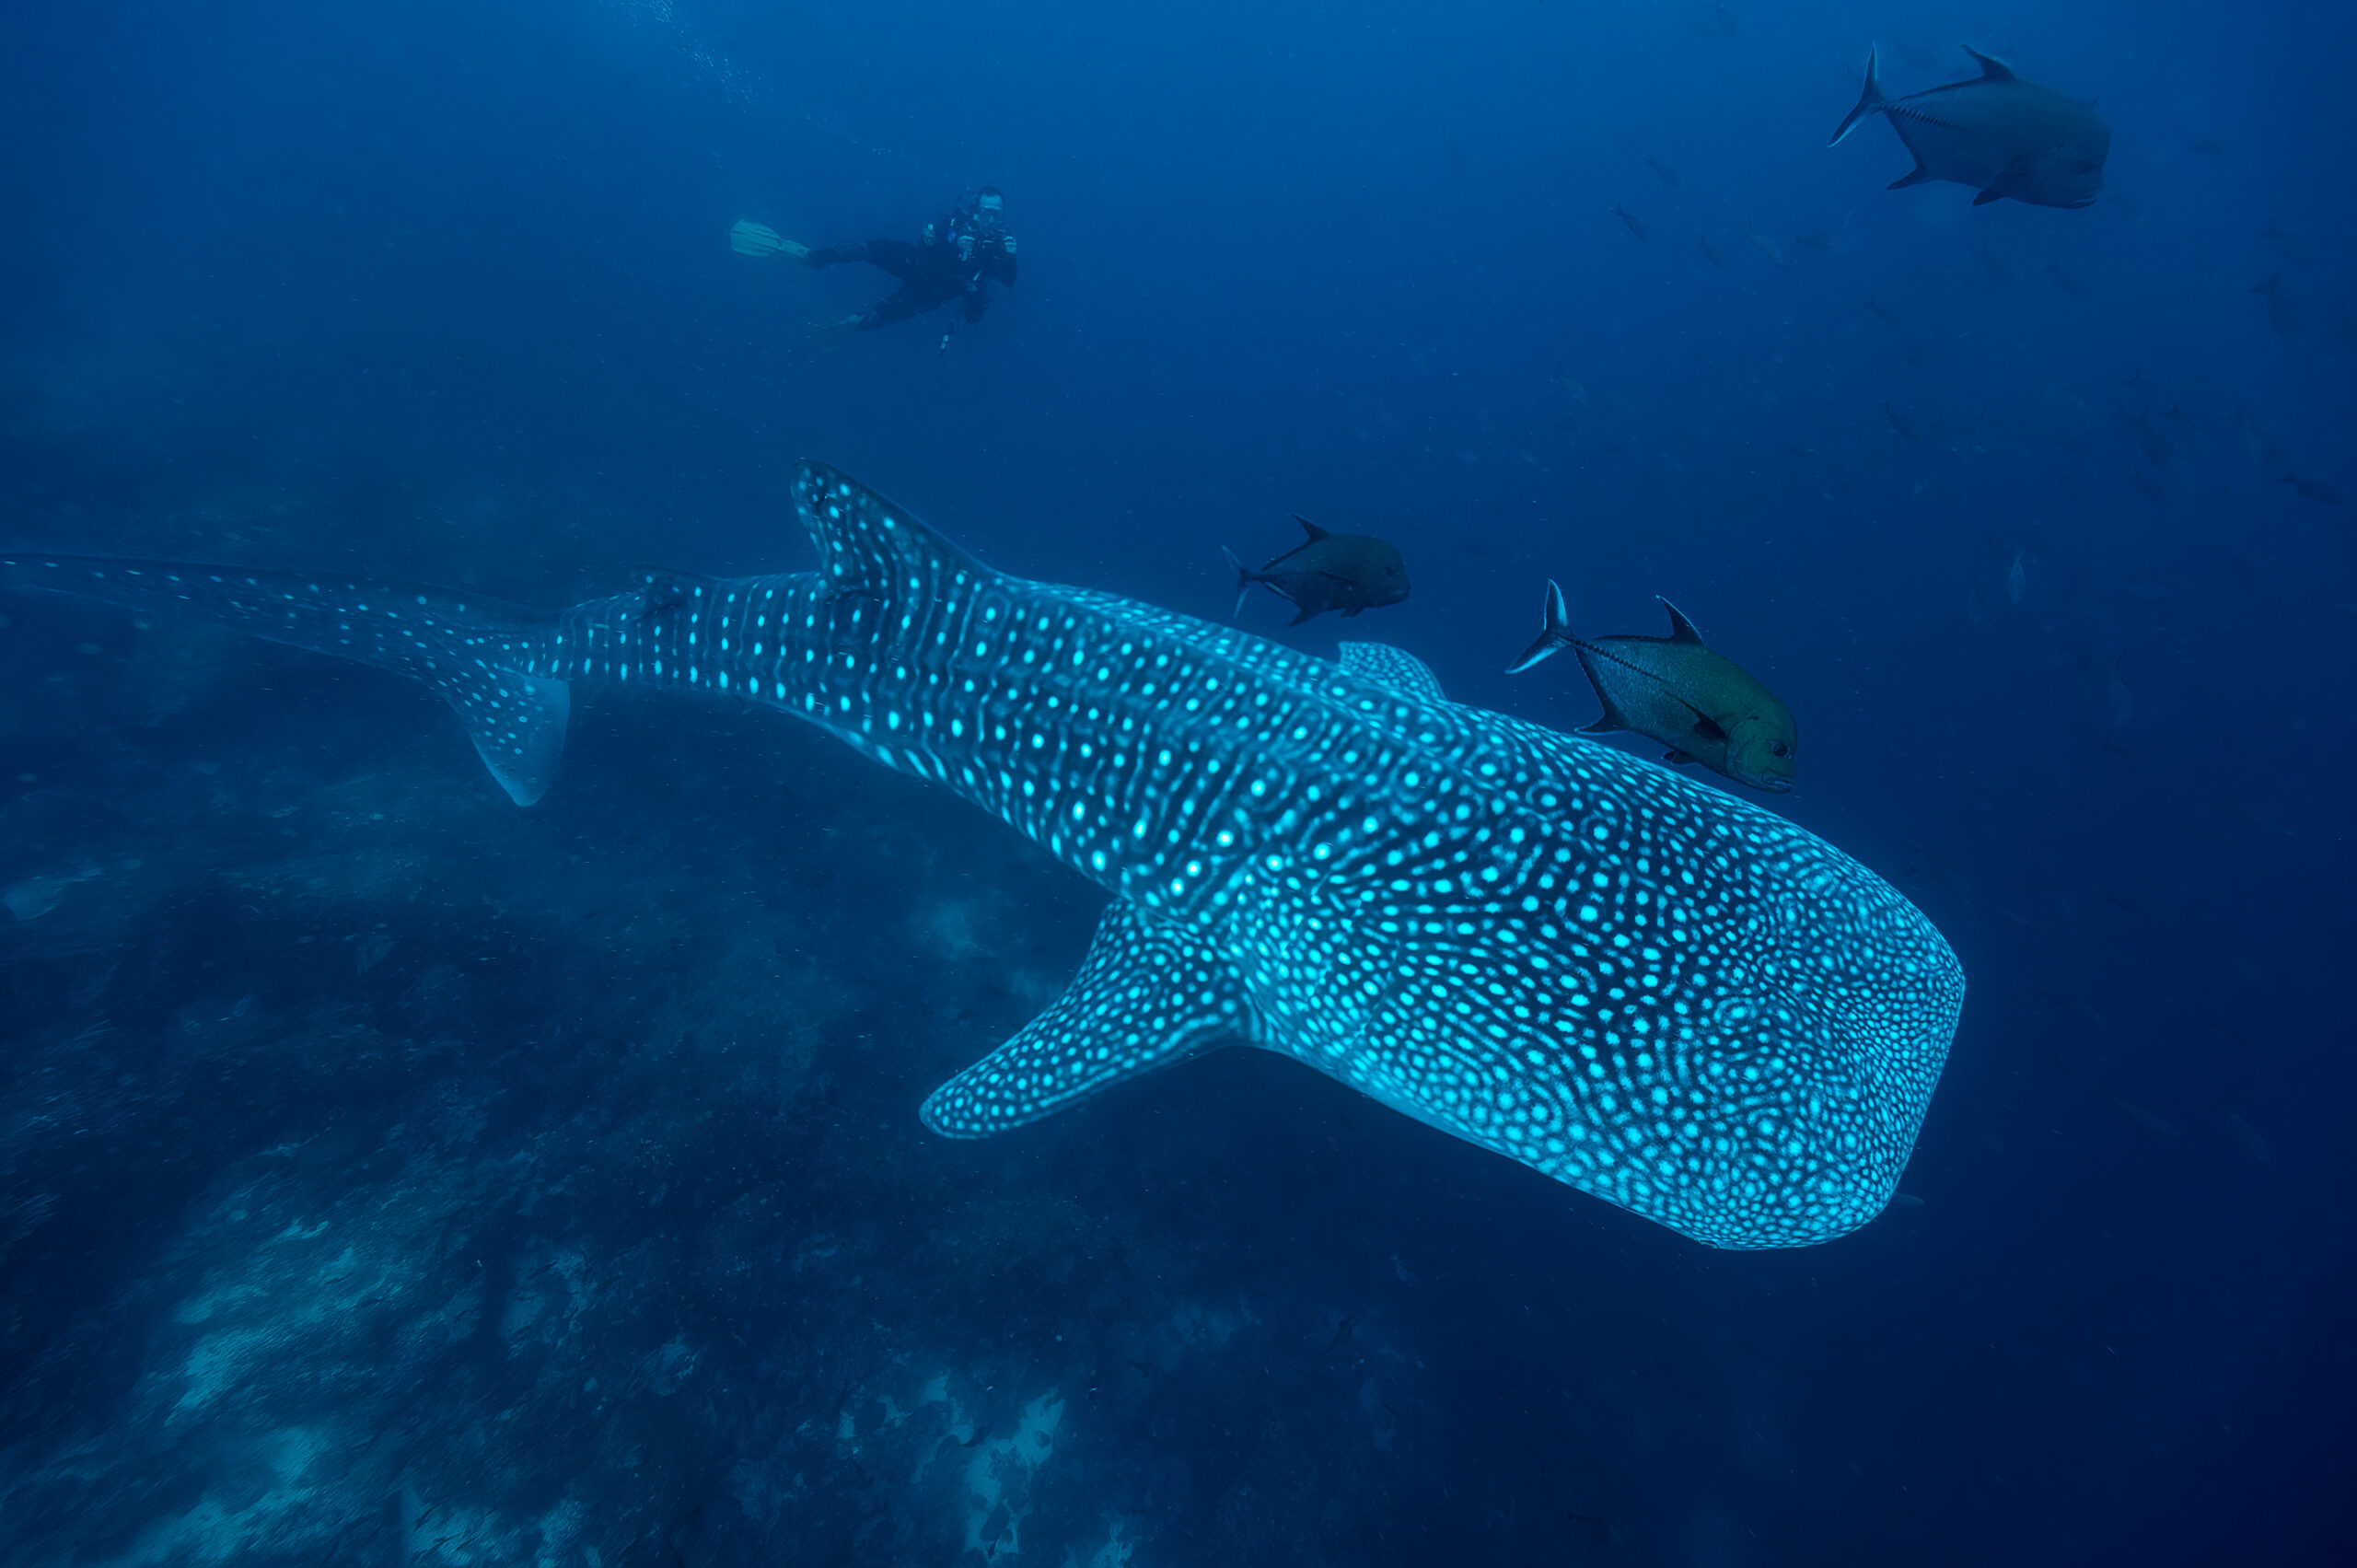 A whale shark disappears into the inky blue
waters of the Galápagos Islands Hope Spot.
In 2022 Ecuador expanded the Galápagos
Marine Reserve to the water boundaries of
Costa Rica.